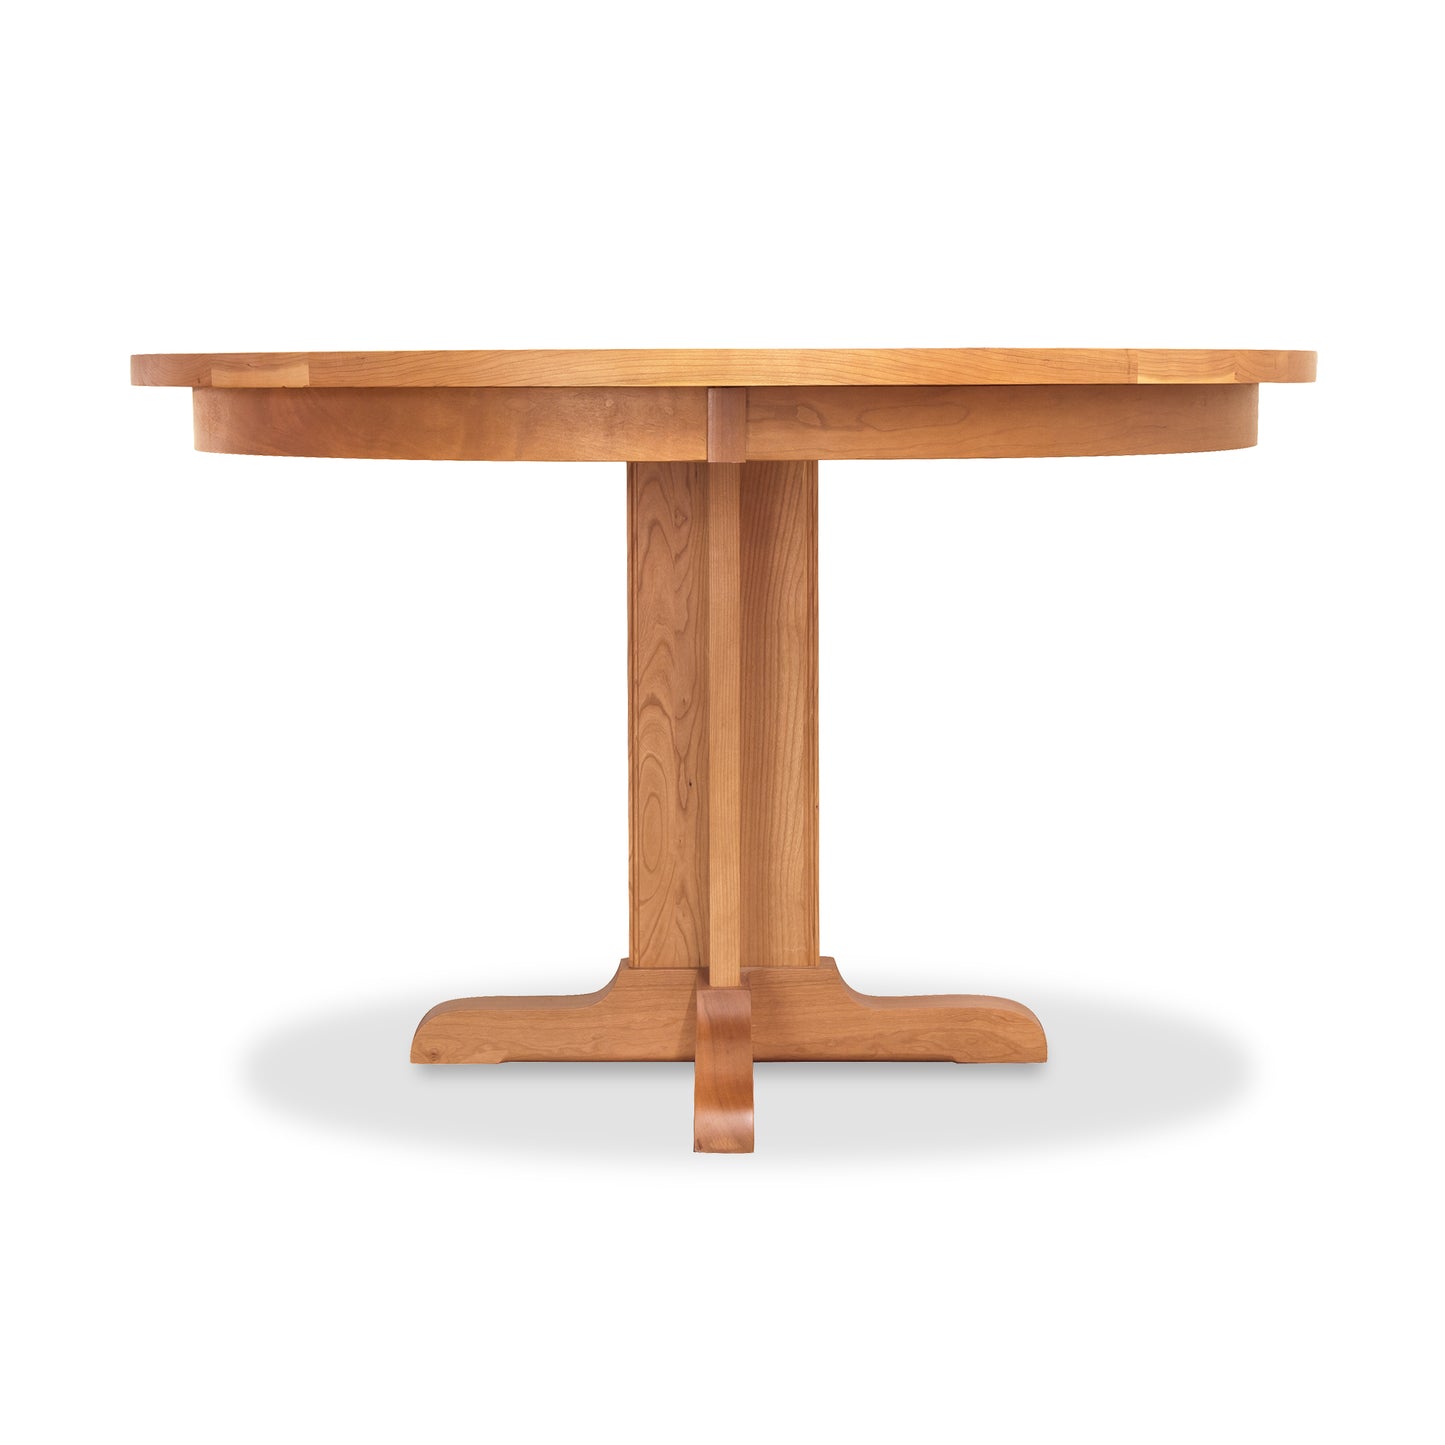 A sturdy Single - Leg Round Pedestal Table with a wooden pedestal base made by Lyndon Furniture.